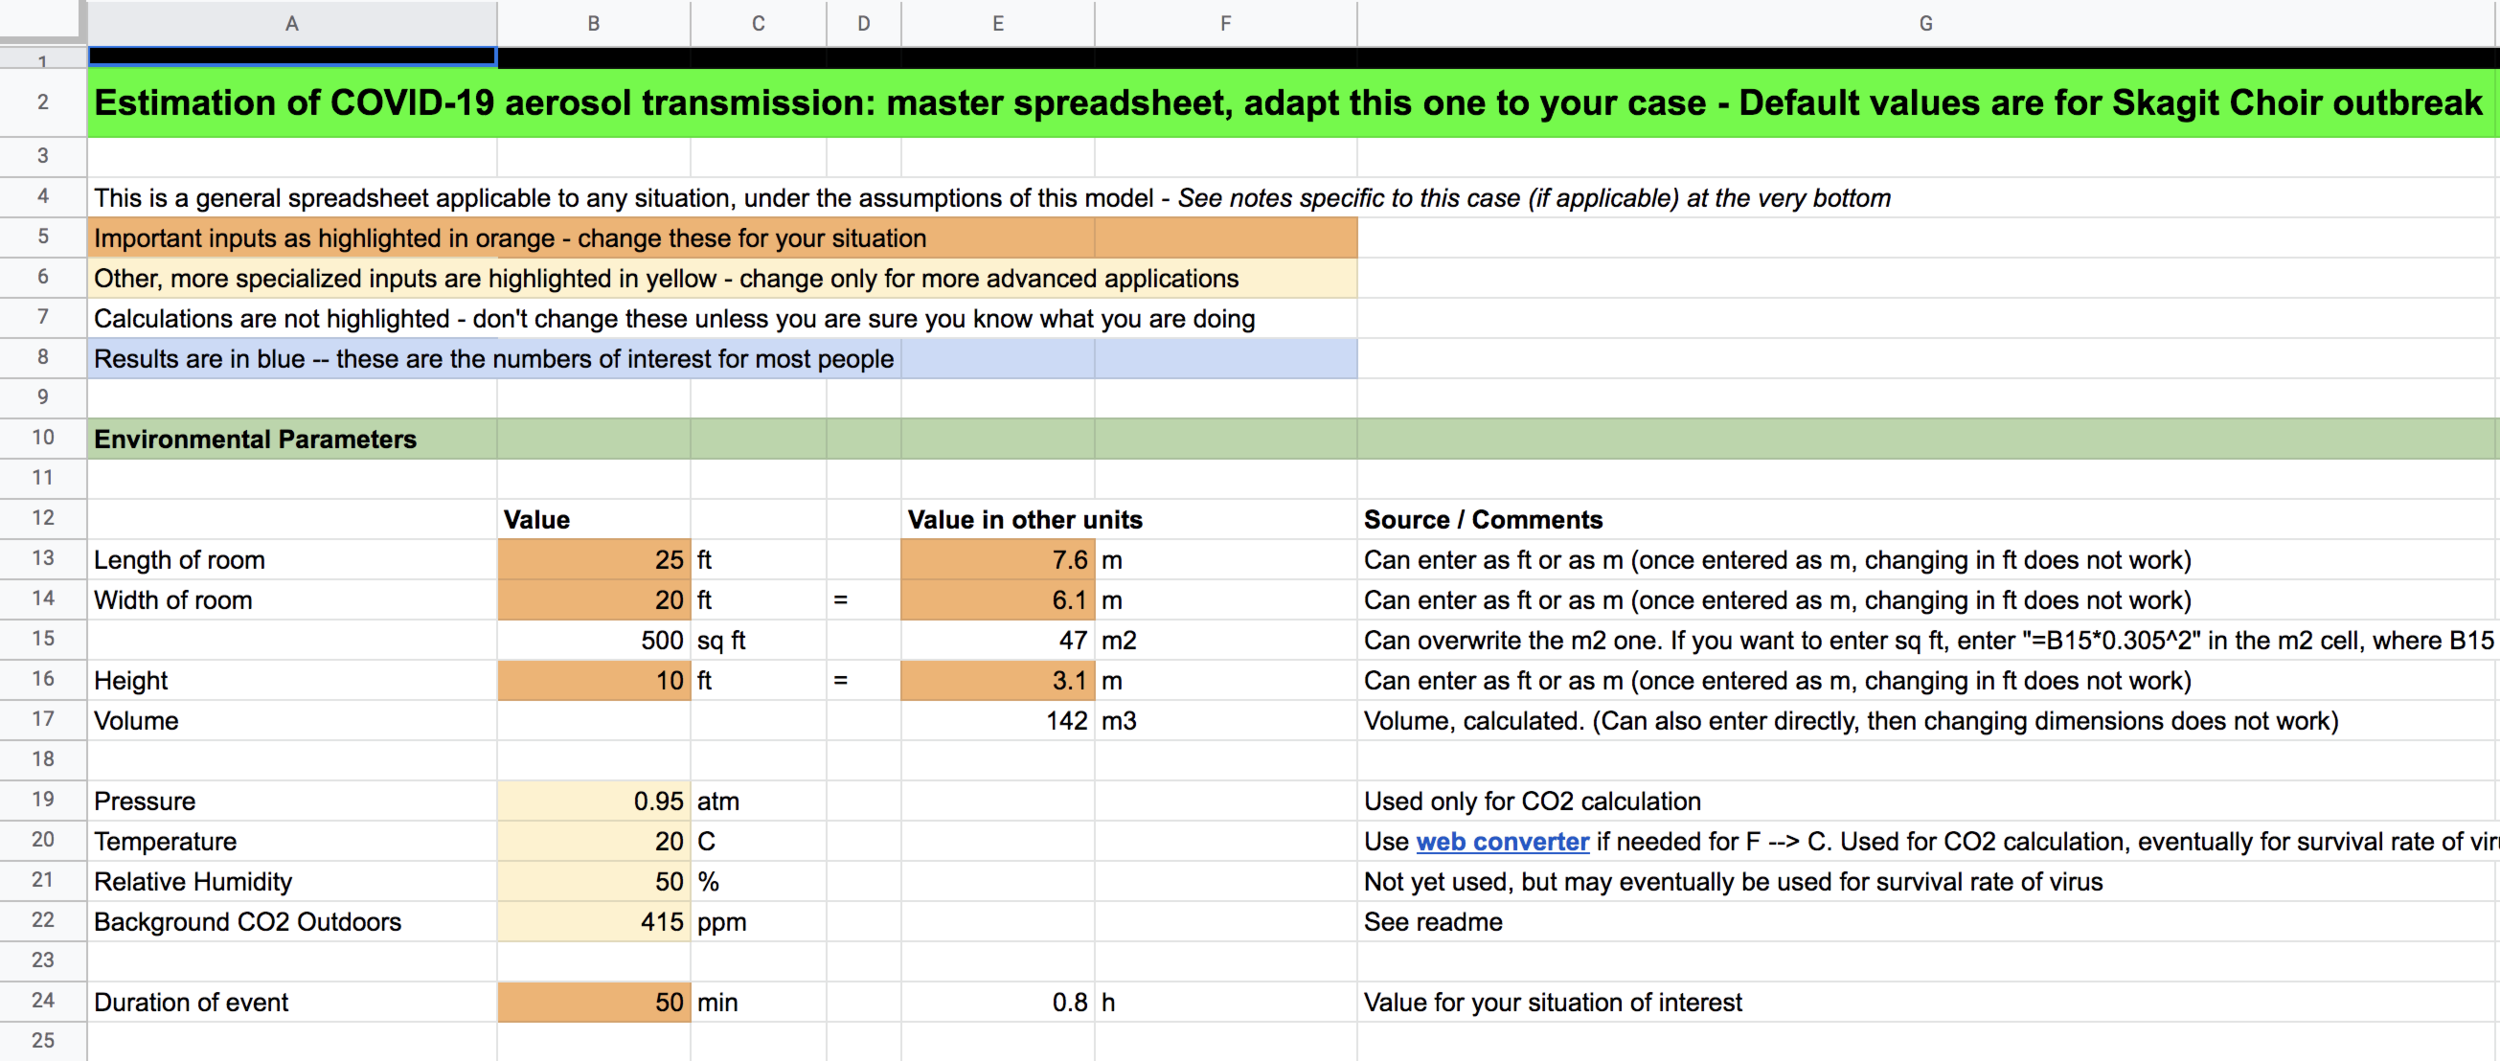 Screenshot of a Google sheet showing the parameters of a model for Covid-19 aerosol transmission